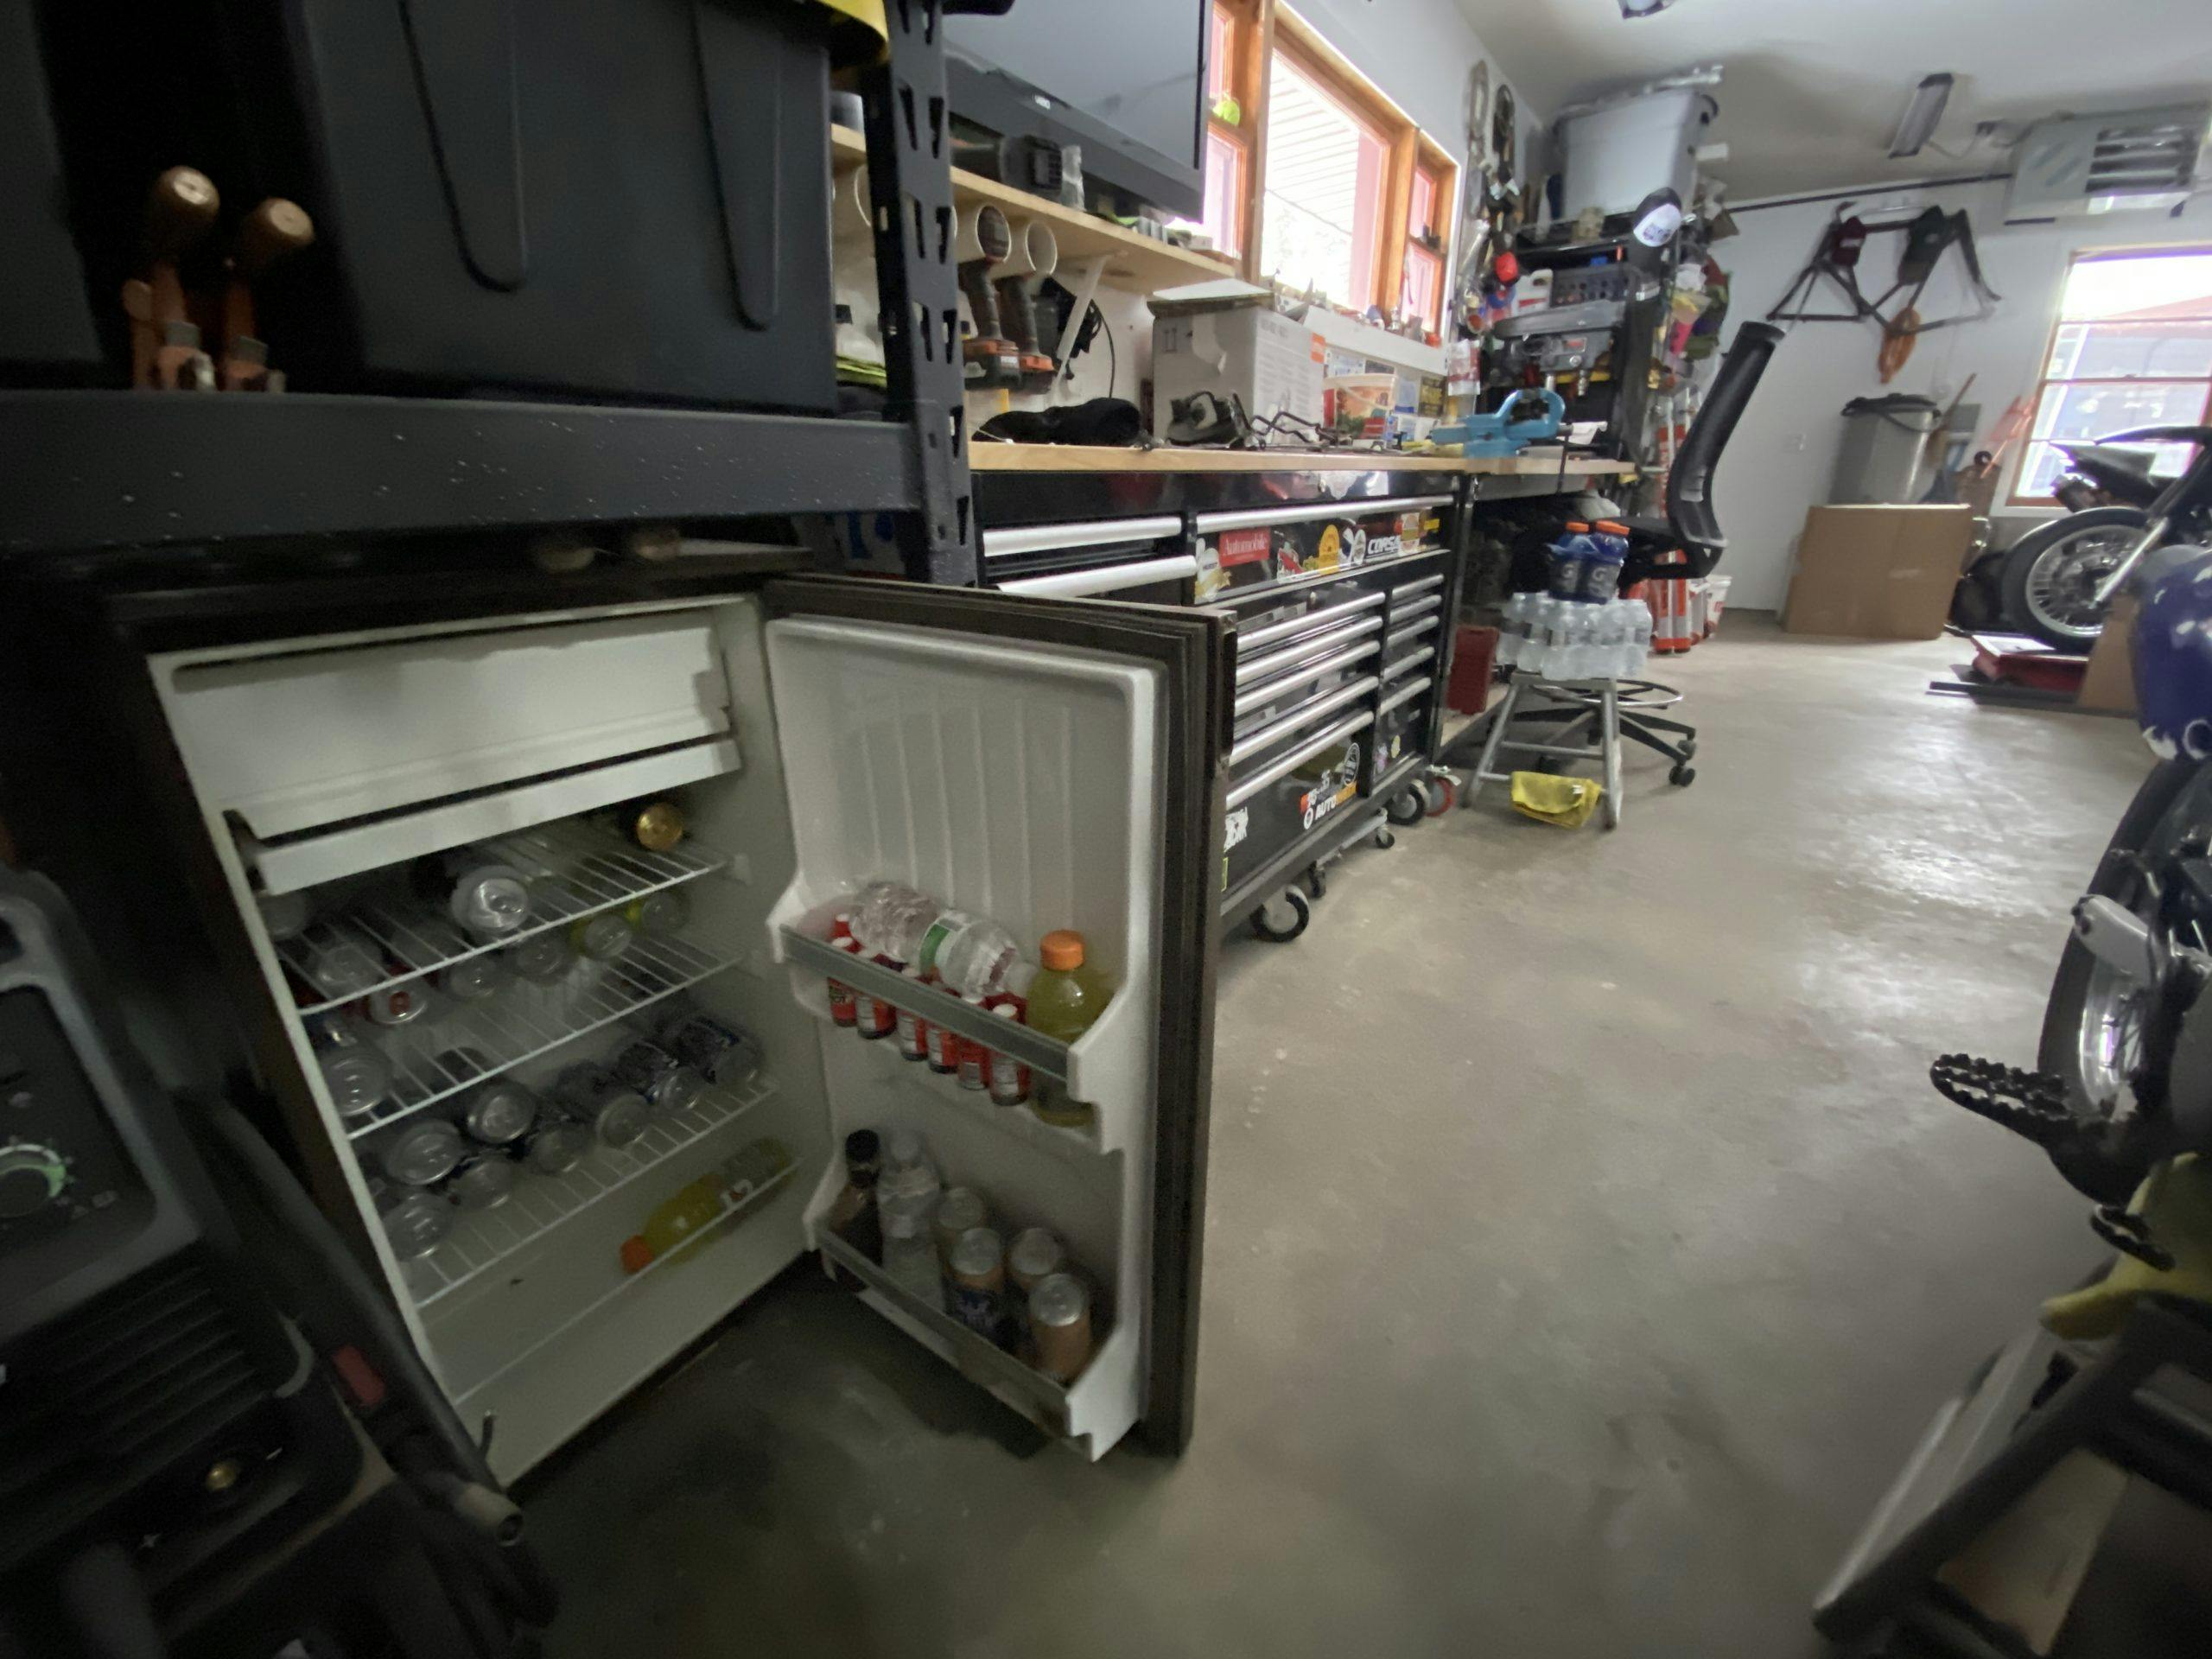 Can You Keep a Fridge in the Garage?